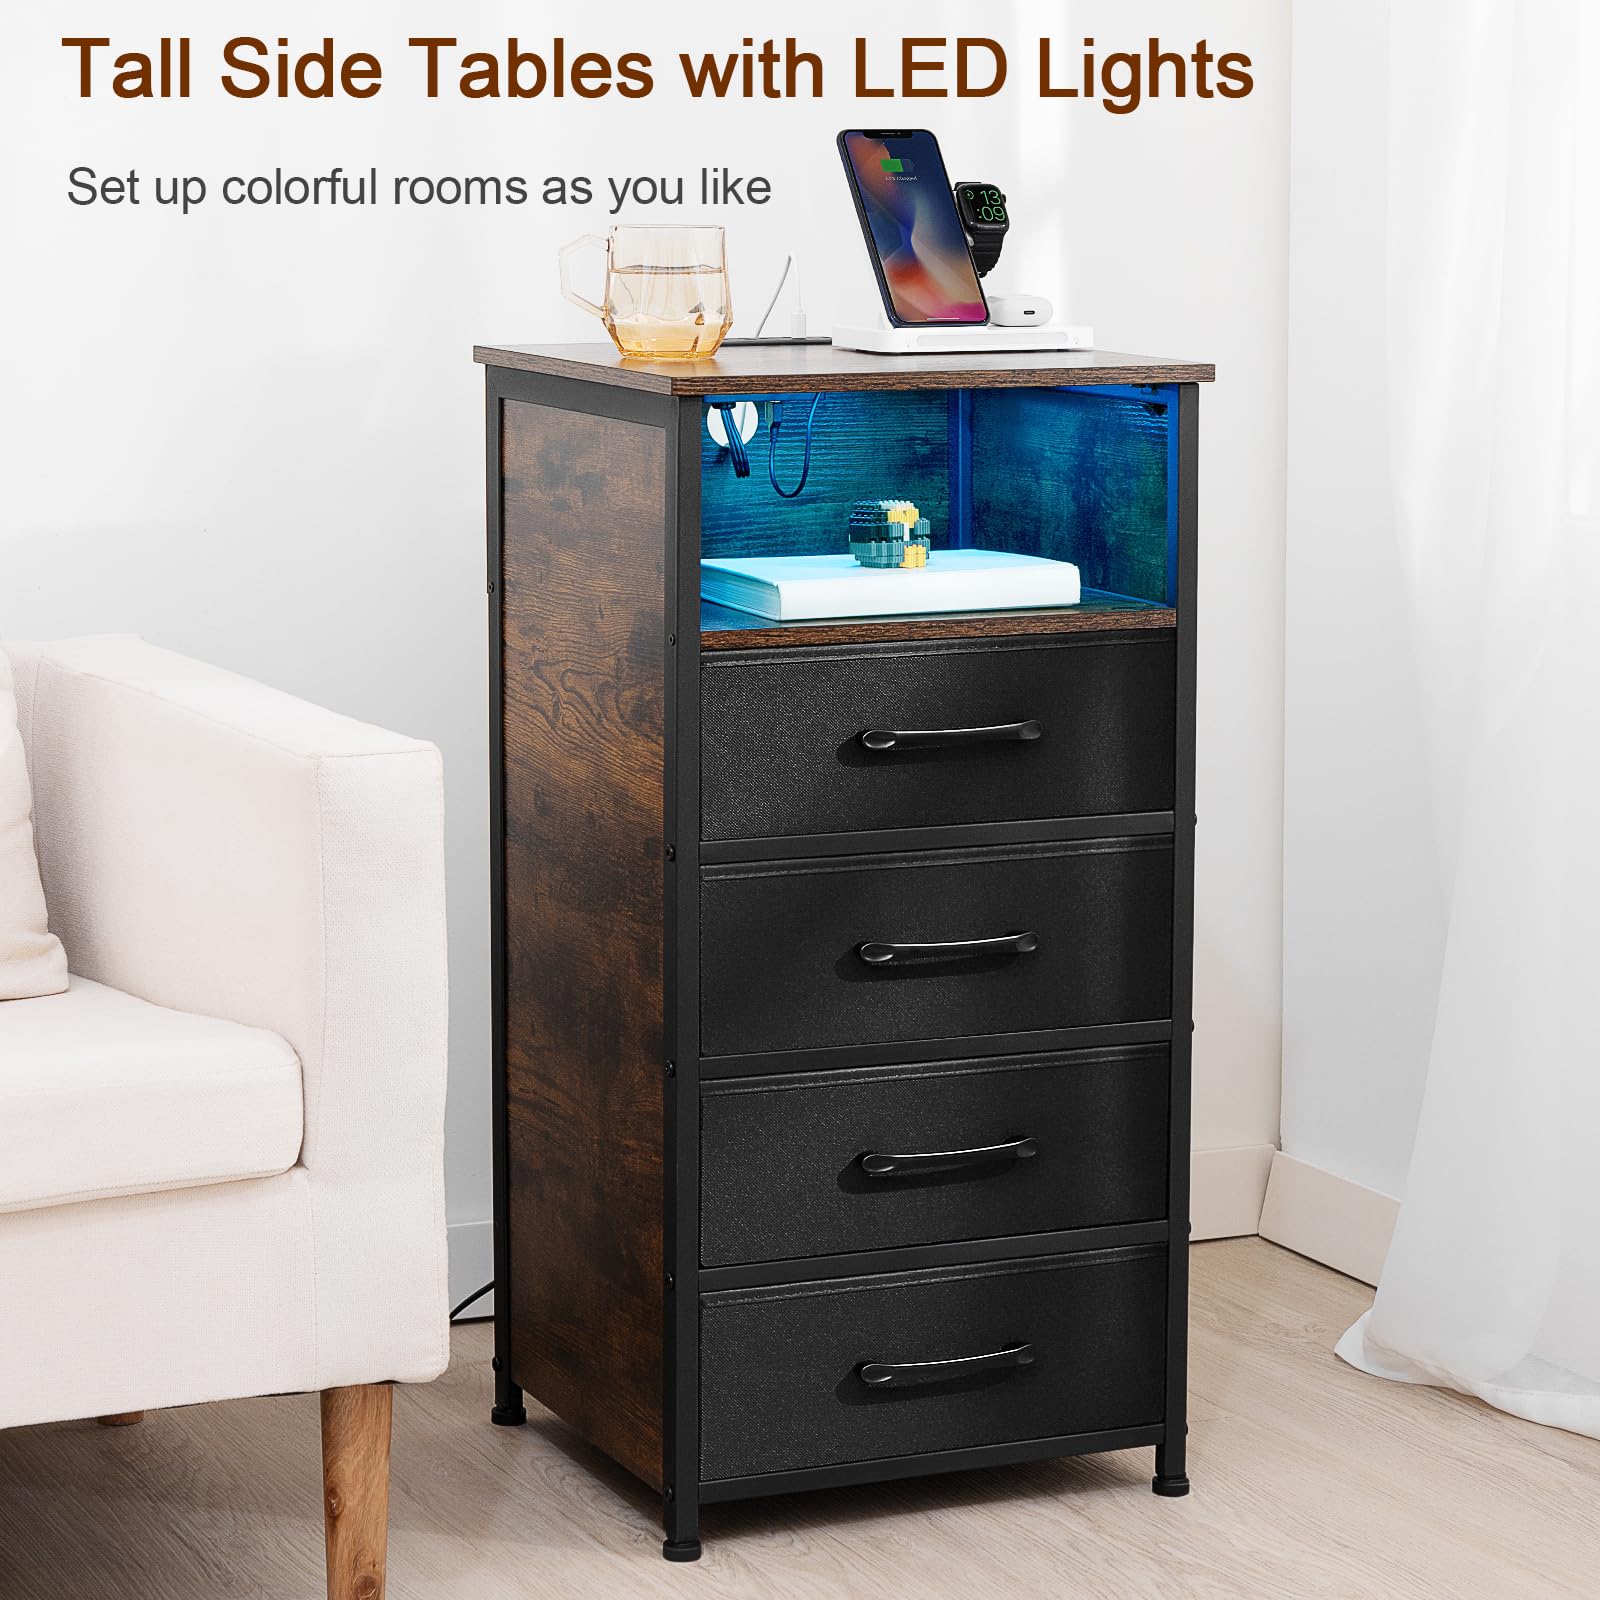 LOAKEKEL Night Stand Set 2, Tall Nightstand with Charging Station, Dresser for Bedroom with 4 Drawers, LED End Tables with USB Ports and Outlets, Bedside Table with Storage Bins, Brown, HNS034BR